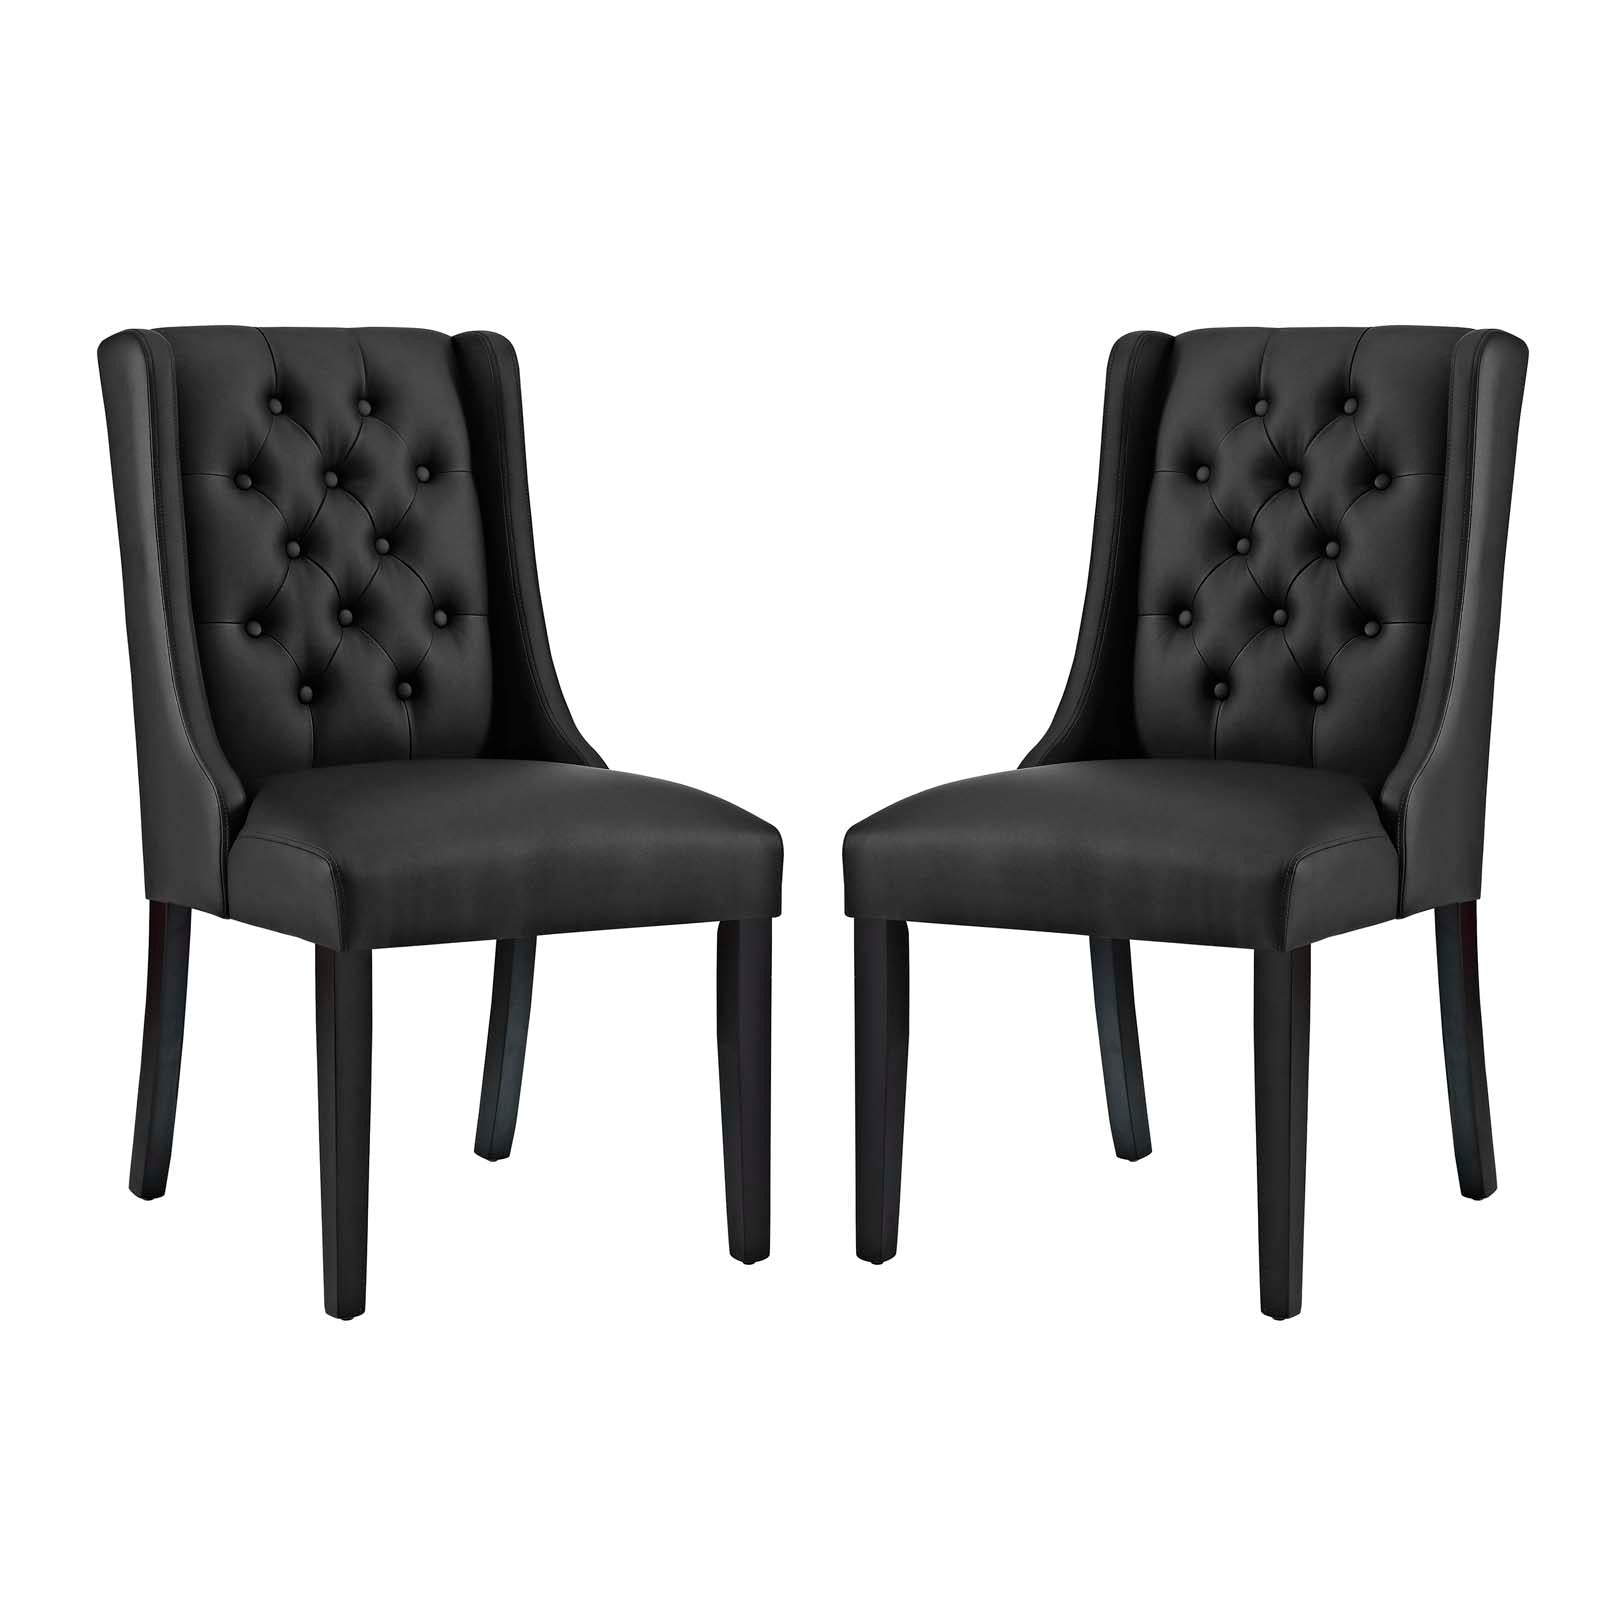 Modway Dining Chairs - Baronet Dining Chair Vinyl Black ( Set of 2 )